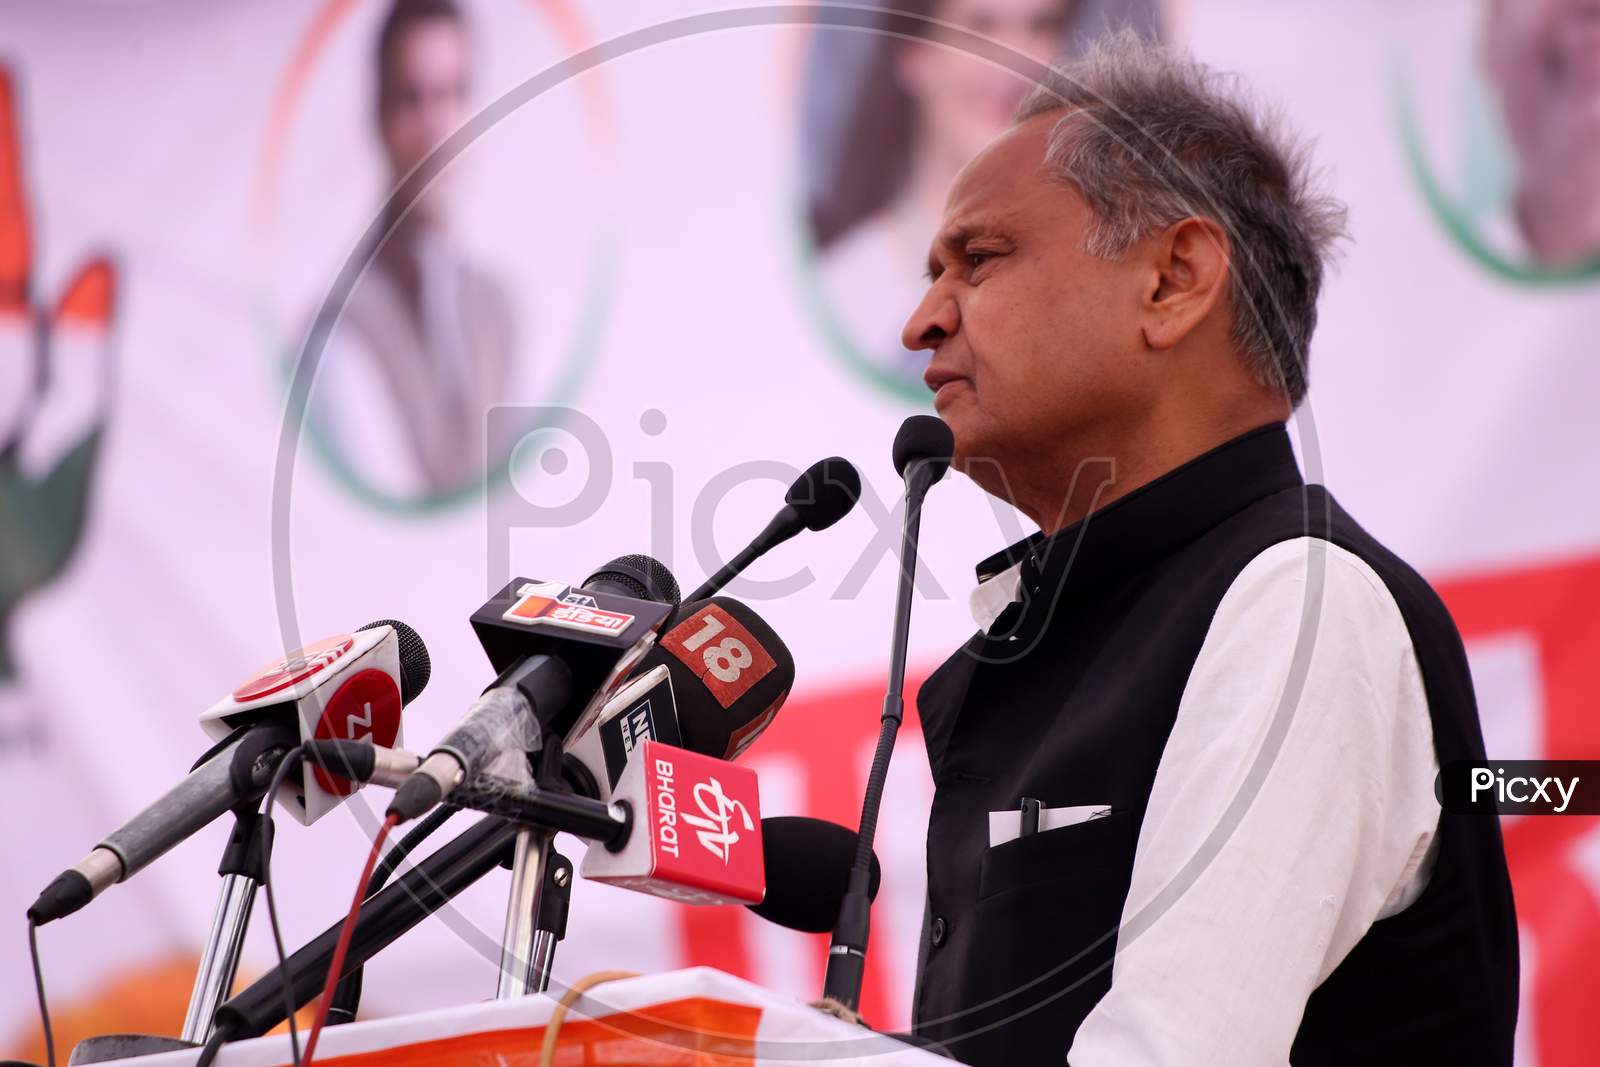 Rajasthan Chief Minister Ashok gehlot participate in a campaign rally ahead of Lok Sabha Elections, 2019 in Ajmer, Rajasthan.